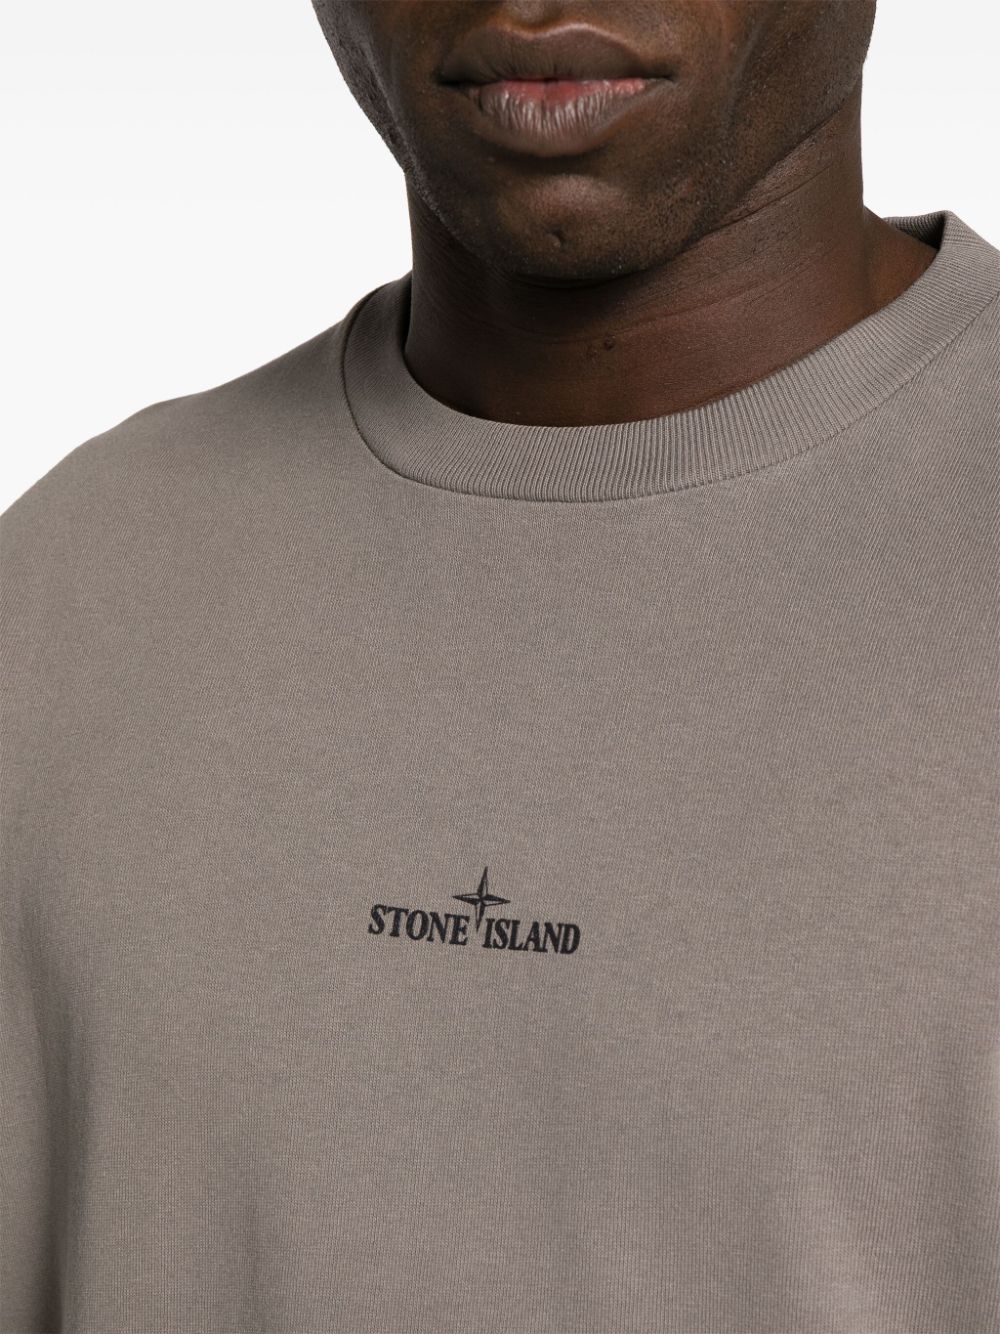 Stone Island - T-Shirt Dove grey 2RC89 'SCRATCHED PAINT ONE' PRINT - Lothaire